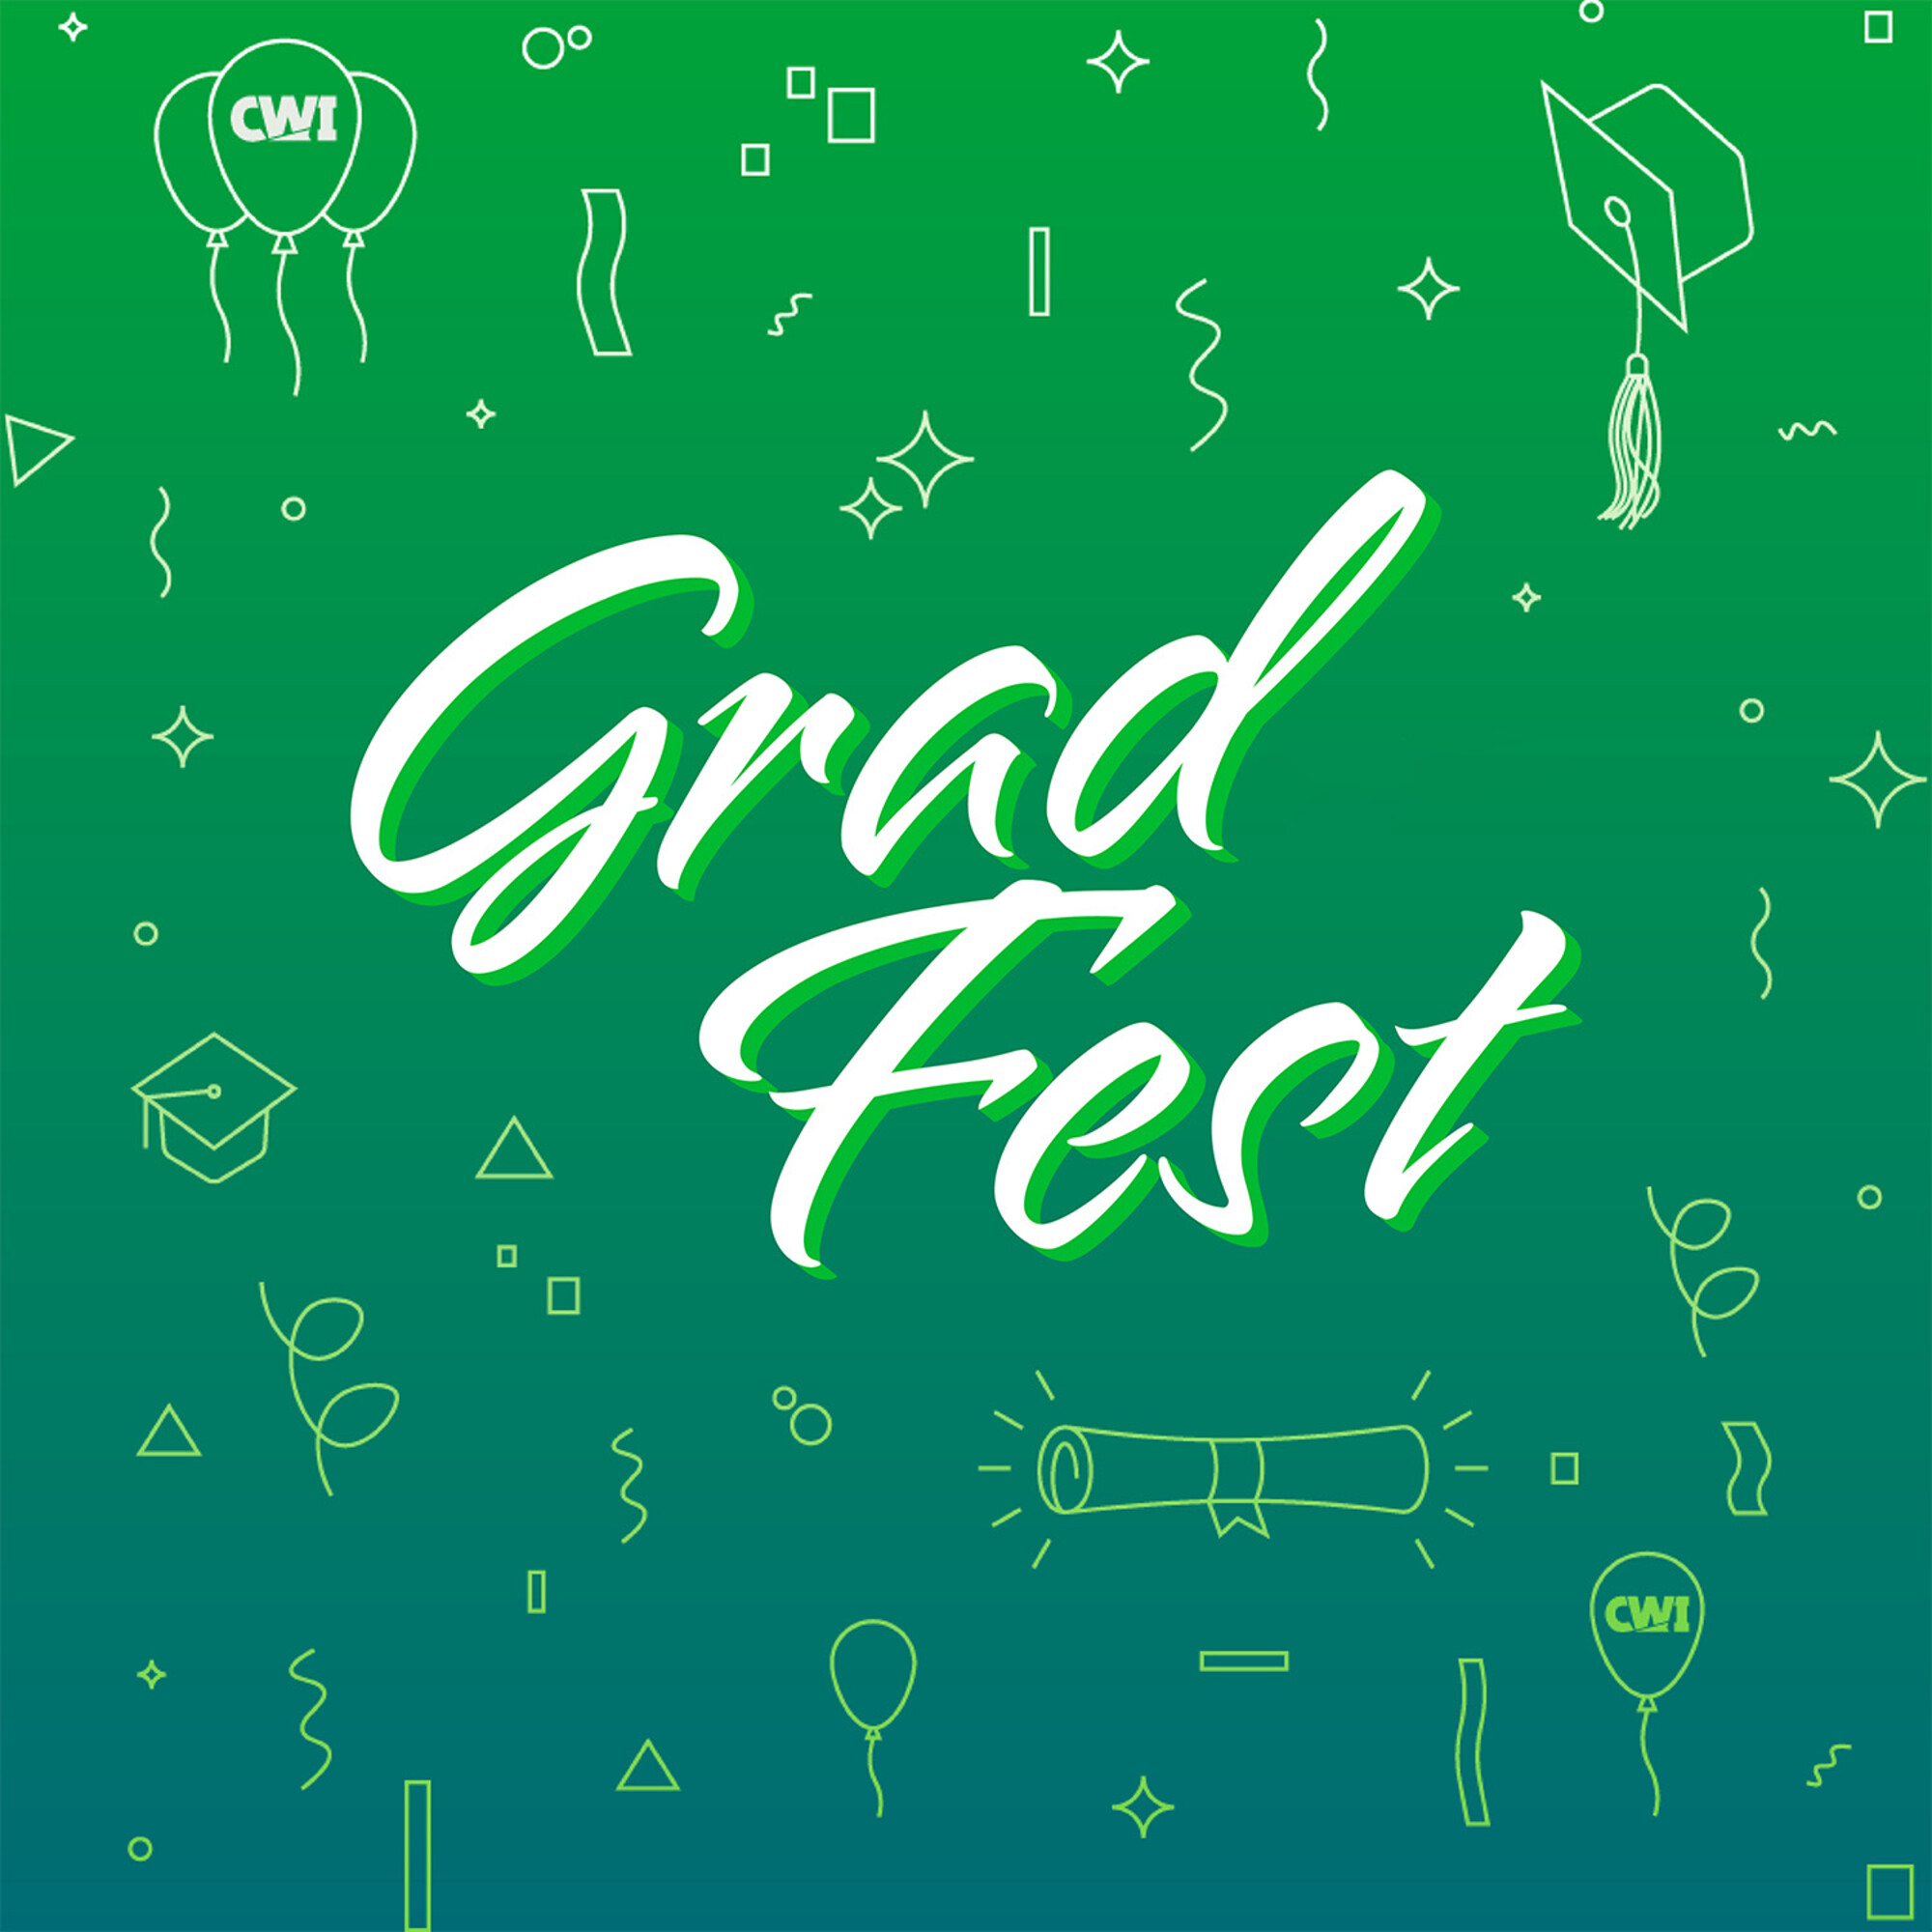 The words "Grad Fest" lay over a green and blue gradient graphic with balloons, diplomas, and other graduation icons.